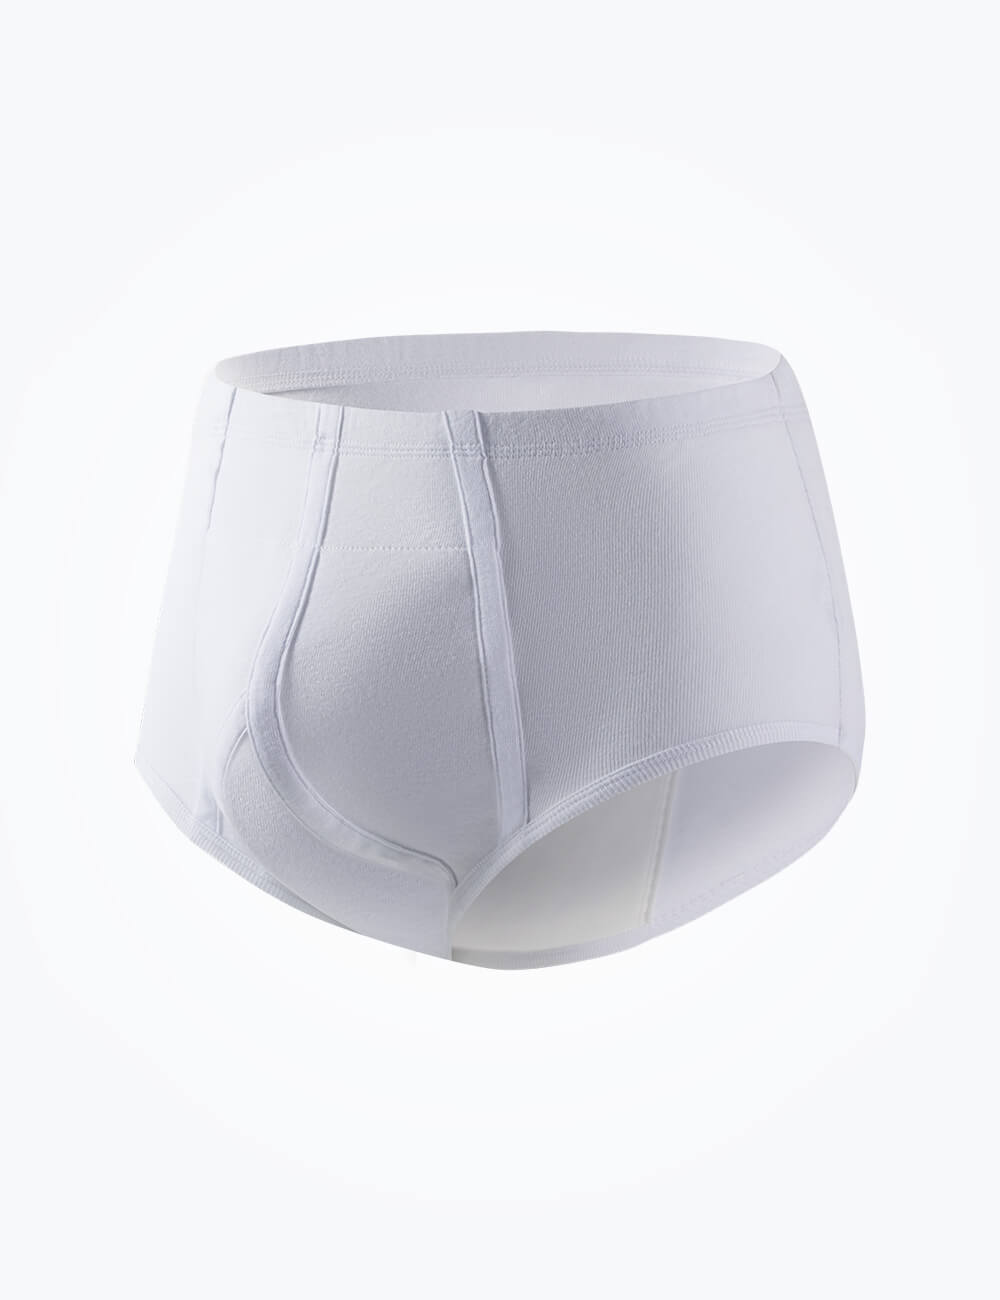 Samples for Disposable Underwear